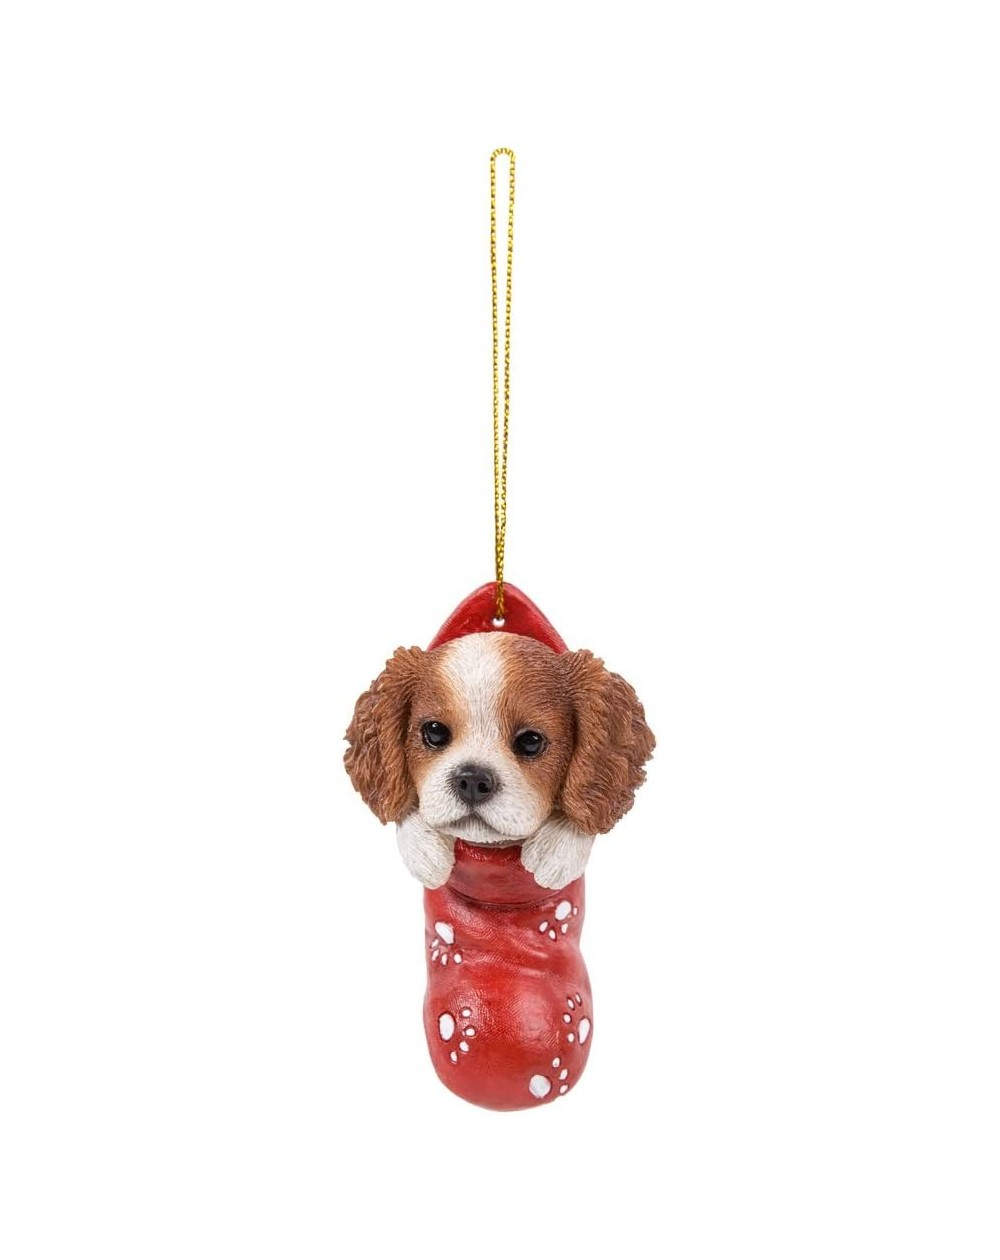 Ornaments King Charles Spaniel in Holiday Sock Decorative Holiday Festive Christmas Hanging Ornament - C7189ZGUNTH $9.70